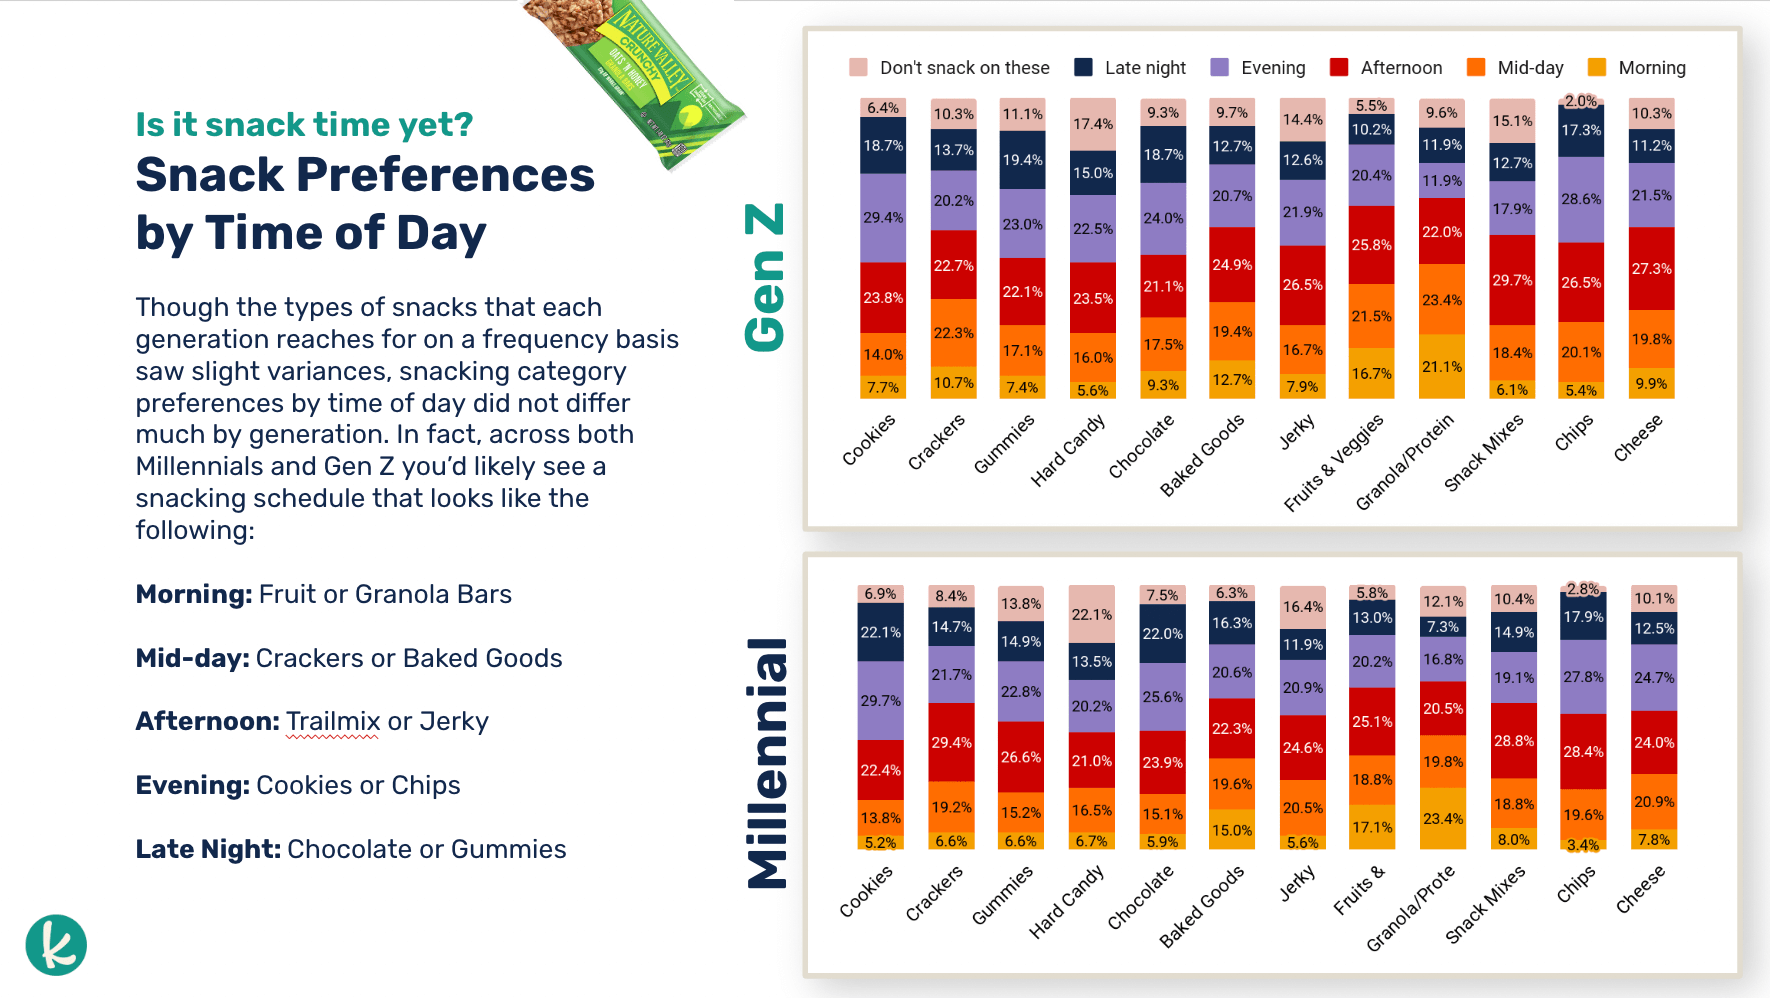 Knit Youth Snacking Report 2022 – Consumer Panel Insights